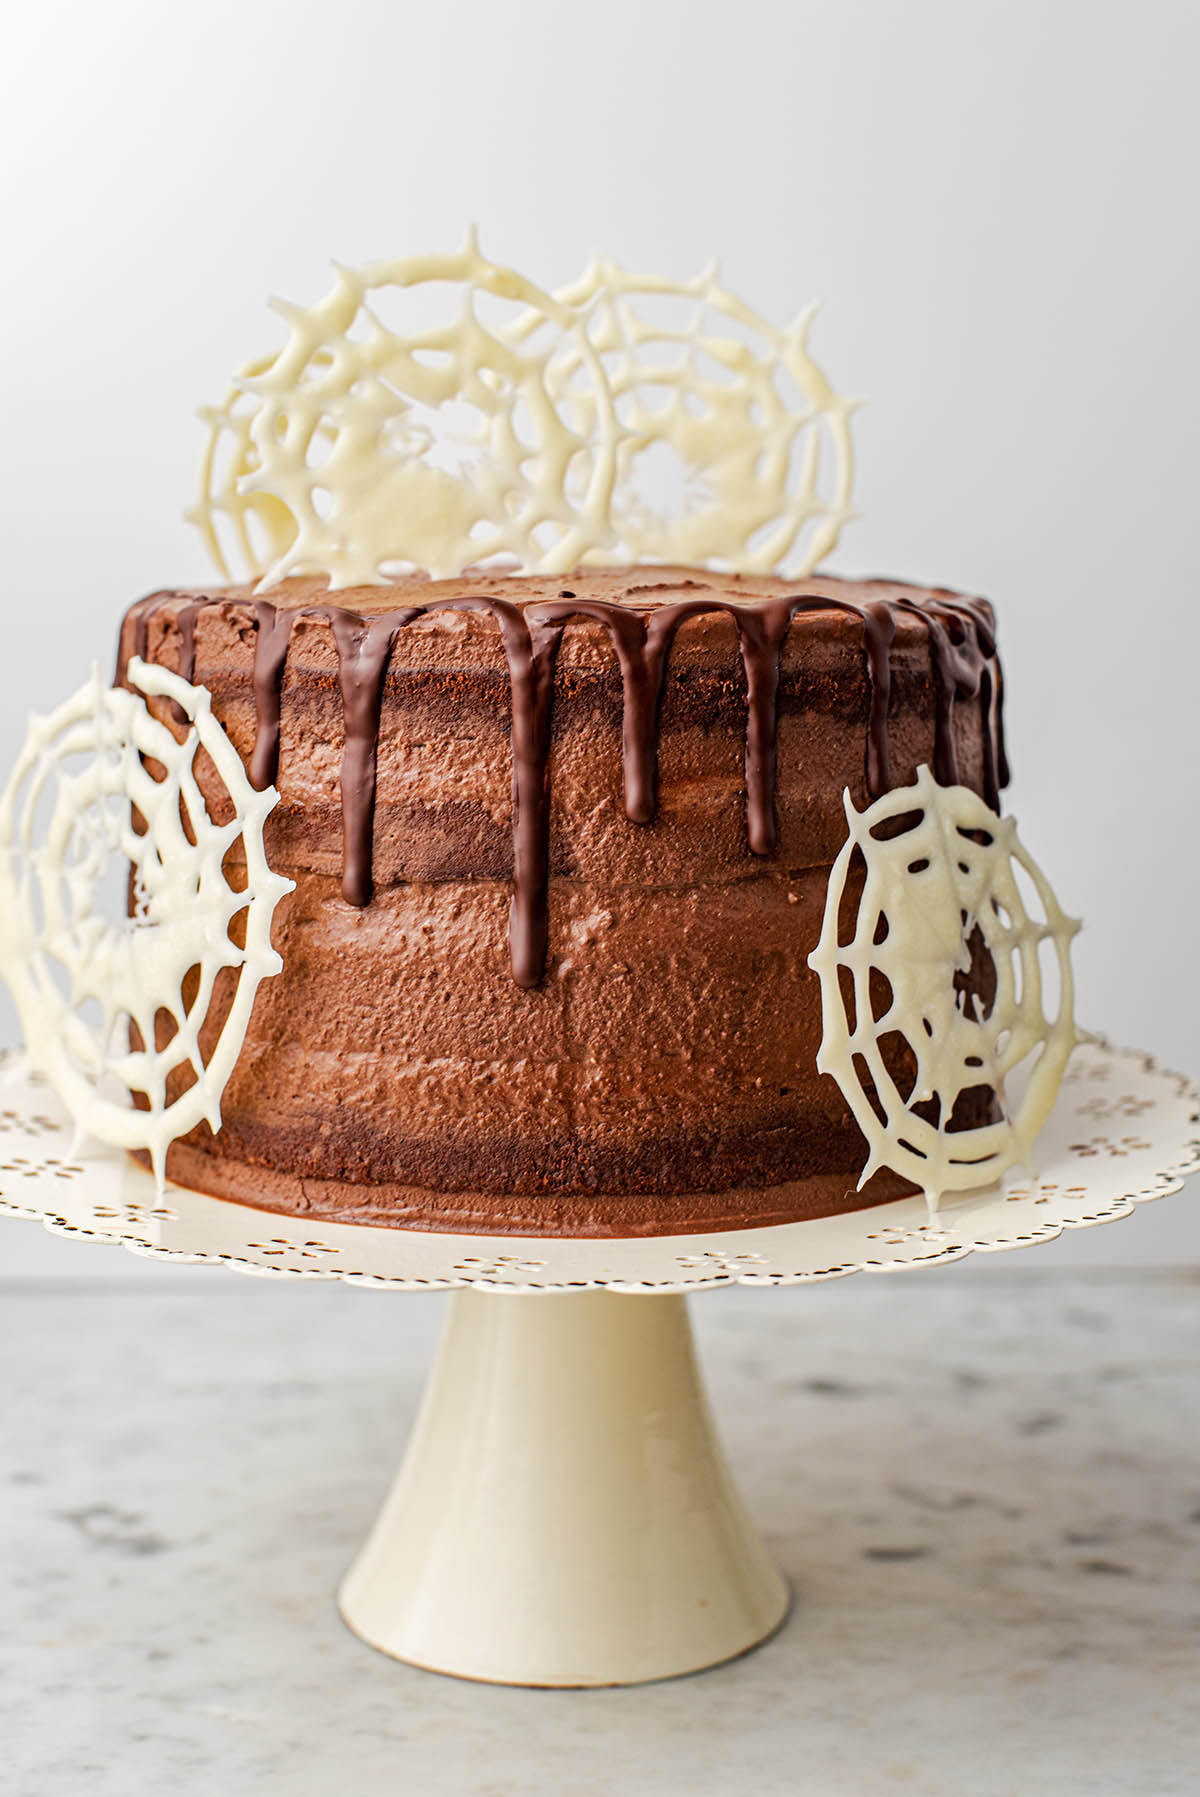 A large chocolate layer cake with white chocolate spiderwebs.